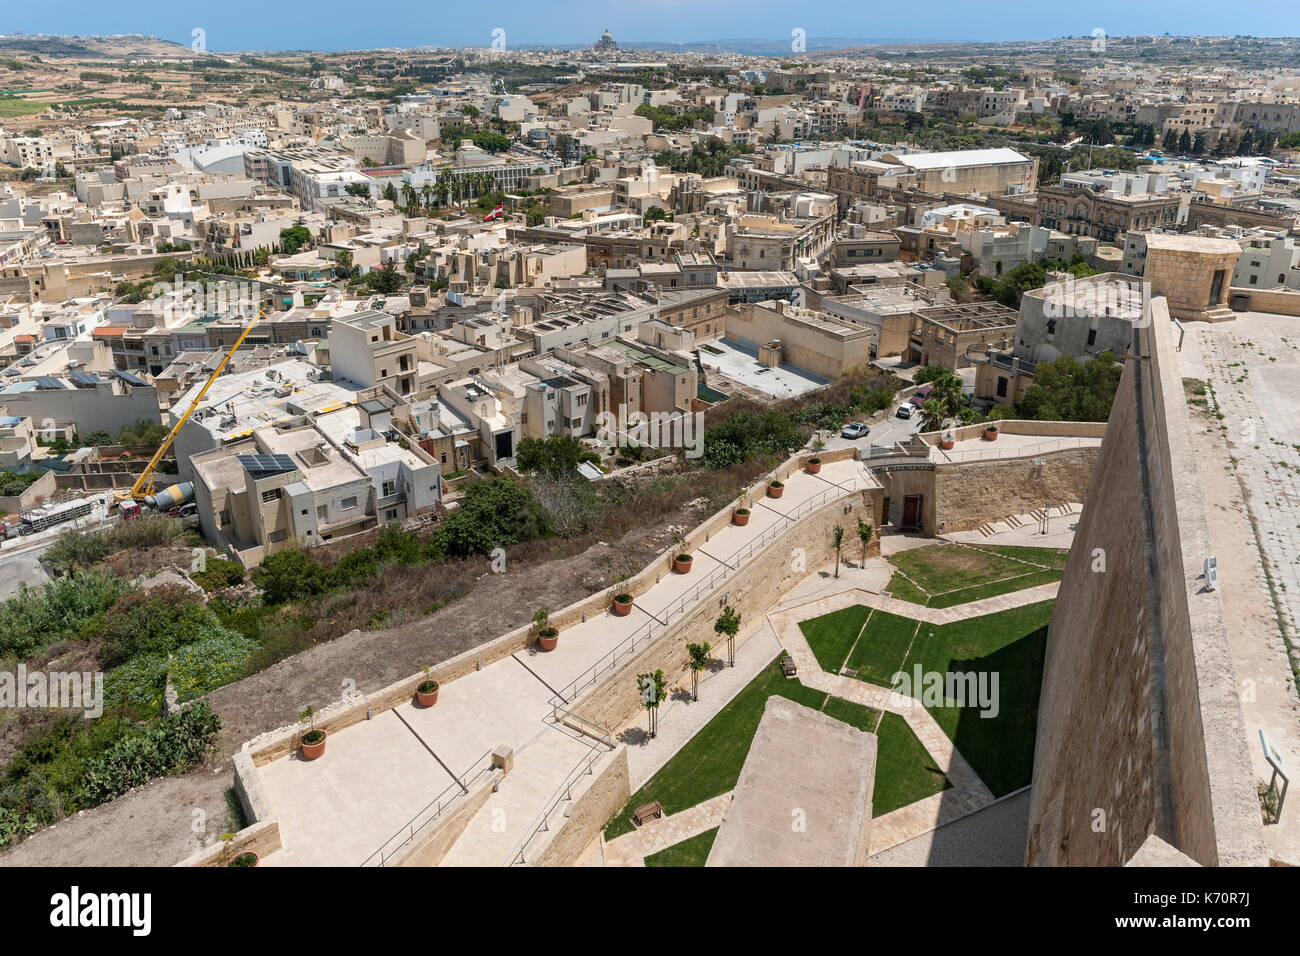 View from the citadel in the town of Victoria, the capital of Gozo island in Malta Stock Photo